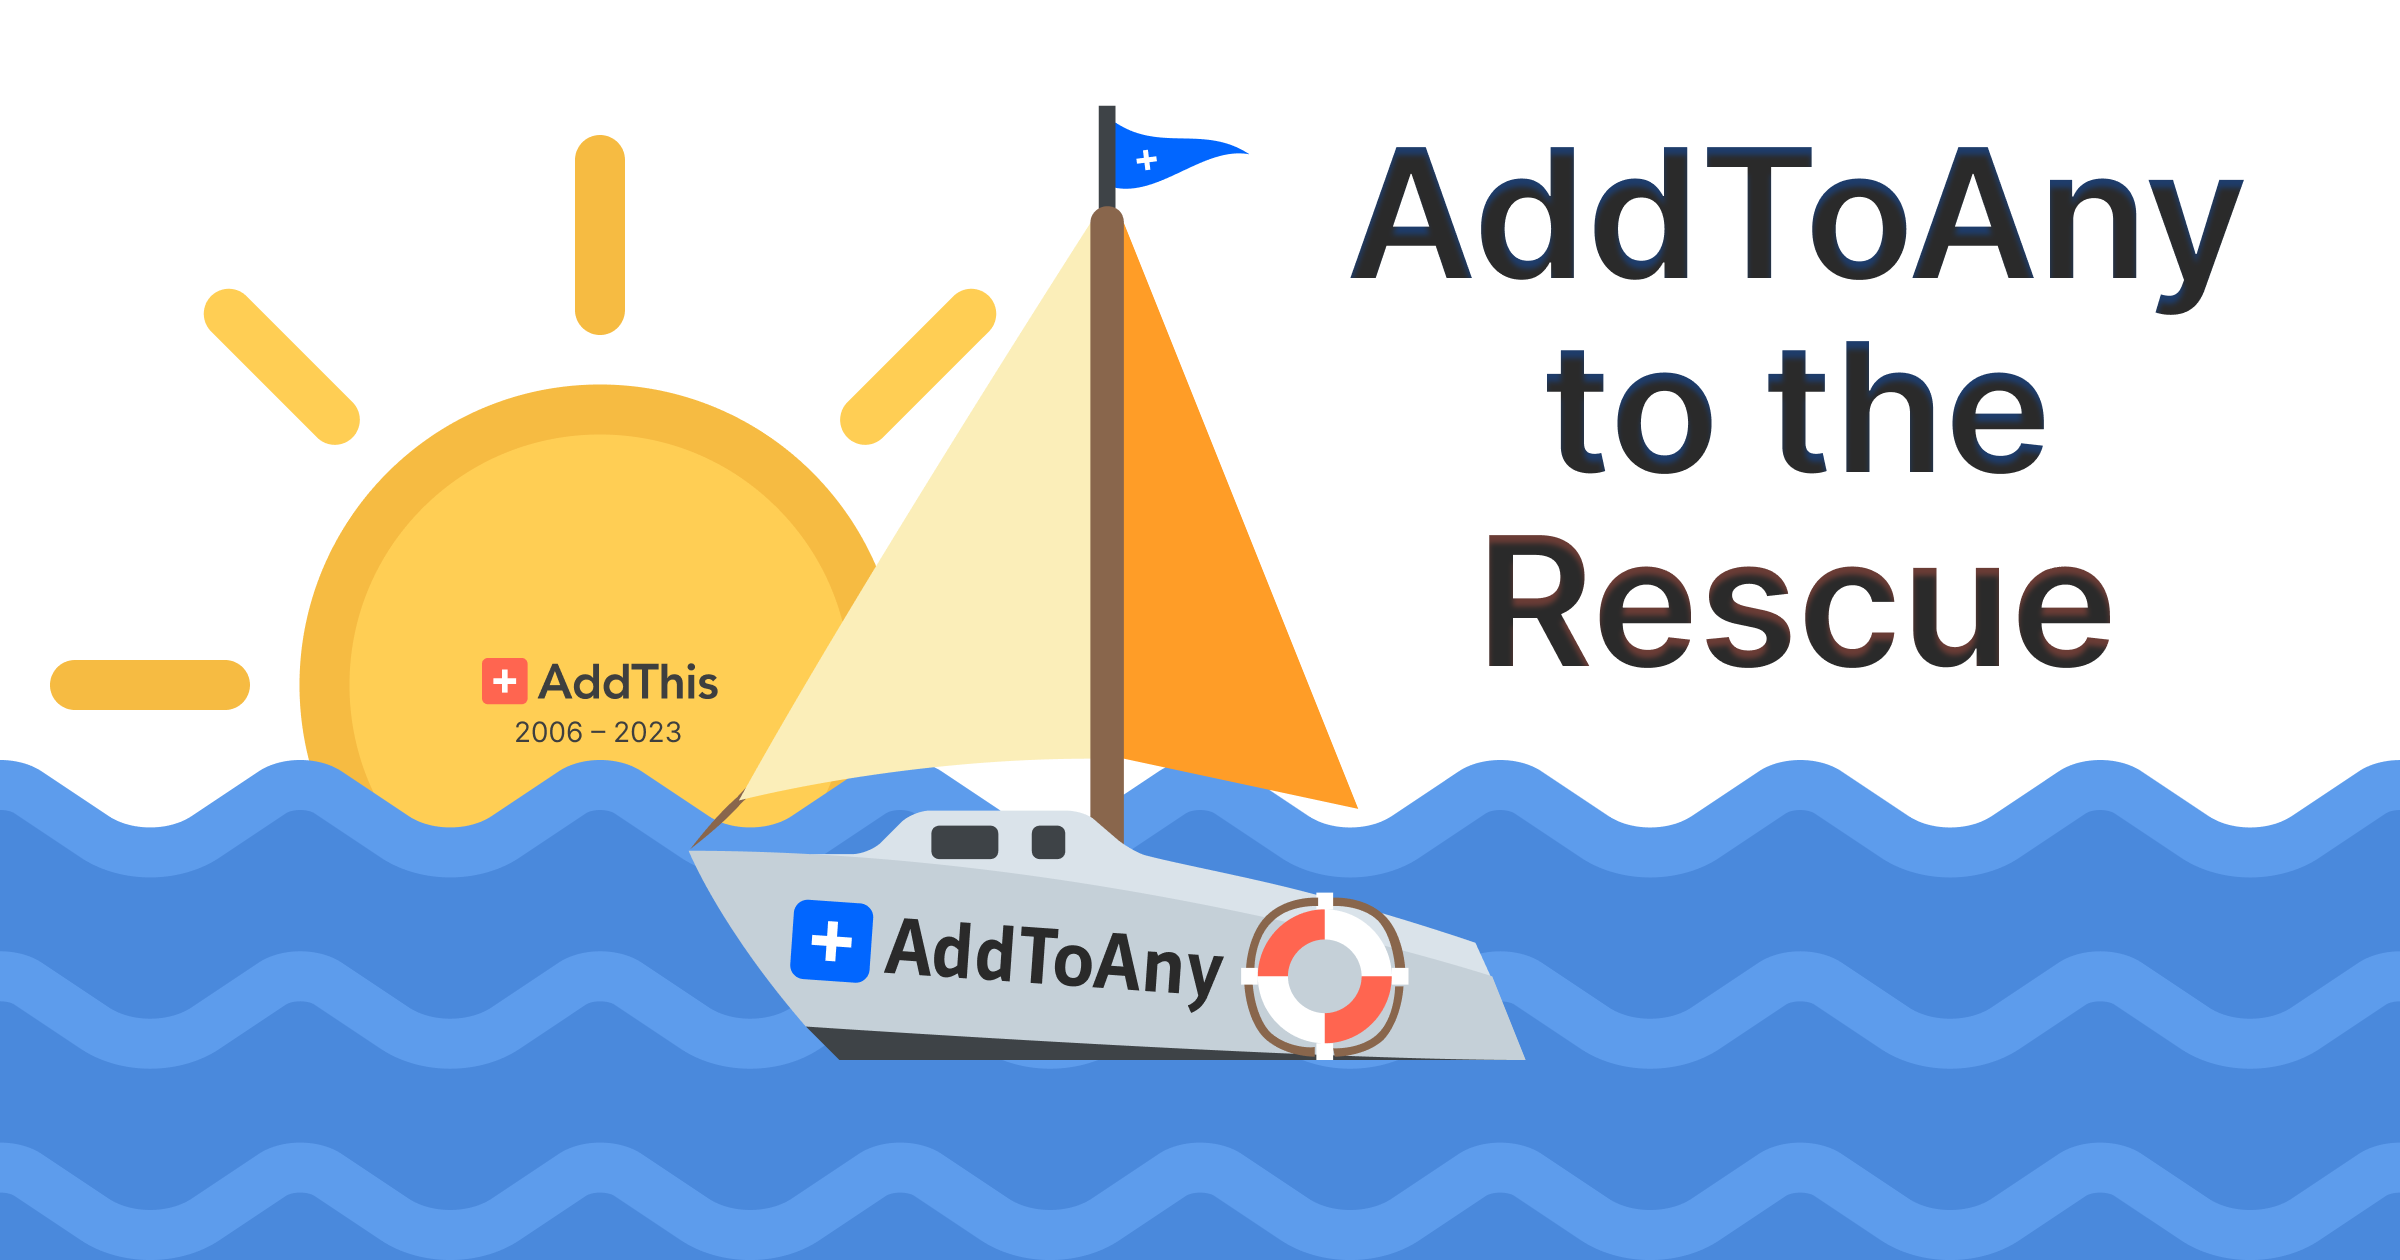 RIP AddThis. AddToAny to the rescue!